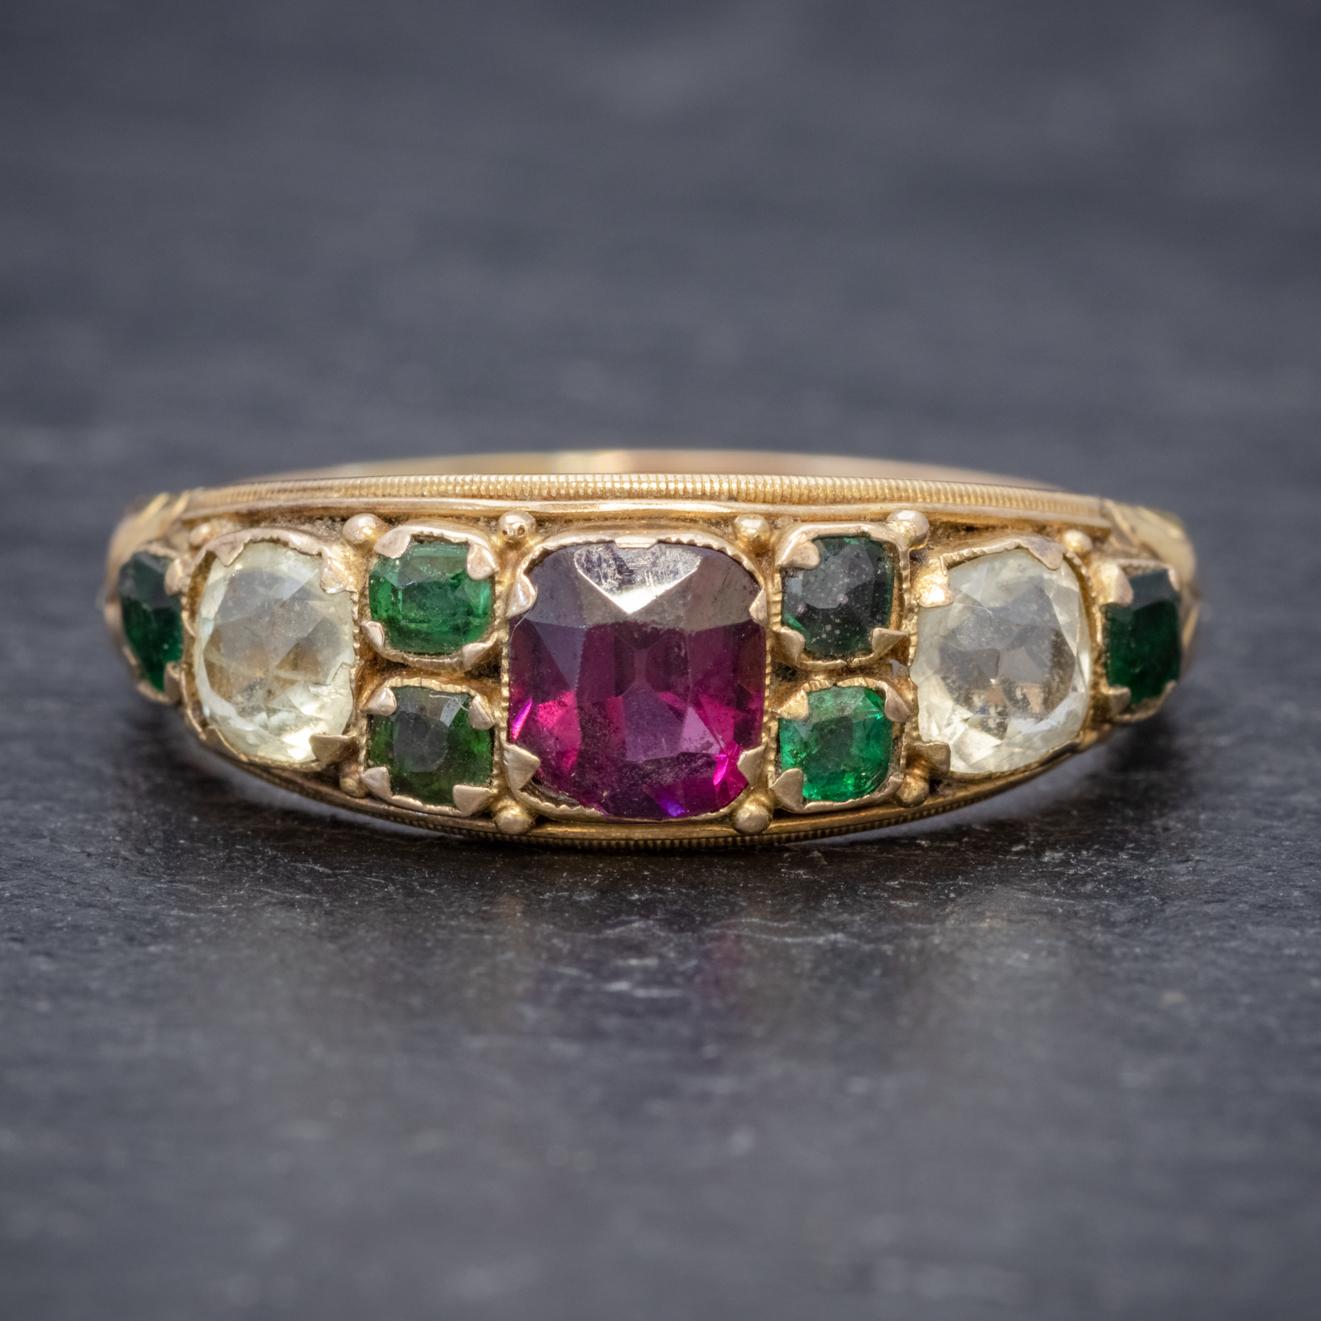 A beautiful antique Victorian ring boasting a splendid combination of gemstones including a 0.60ct Almandine Garnet in the centre, two clear 0.25ct Quartz stones and six 0.08ct green Garnets. 

The gallery is all 15ct Yellow Gold and displays lovely